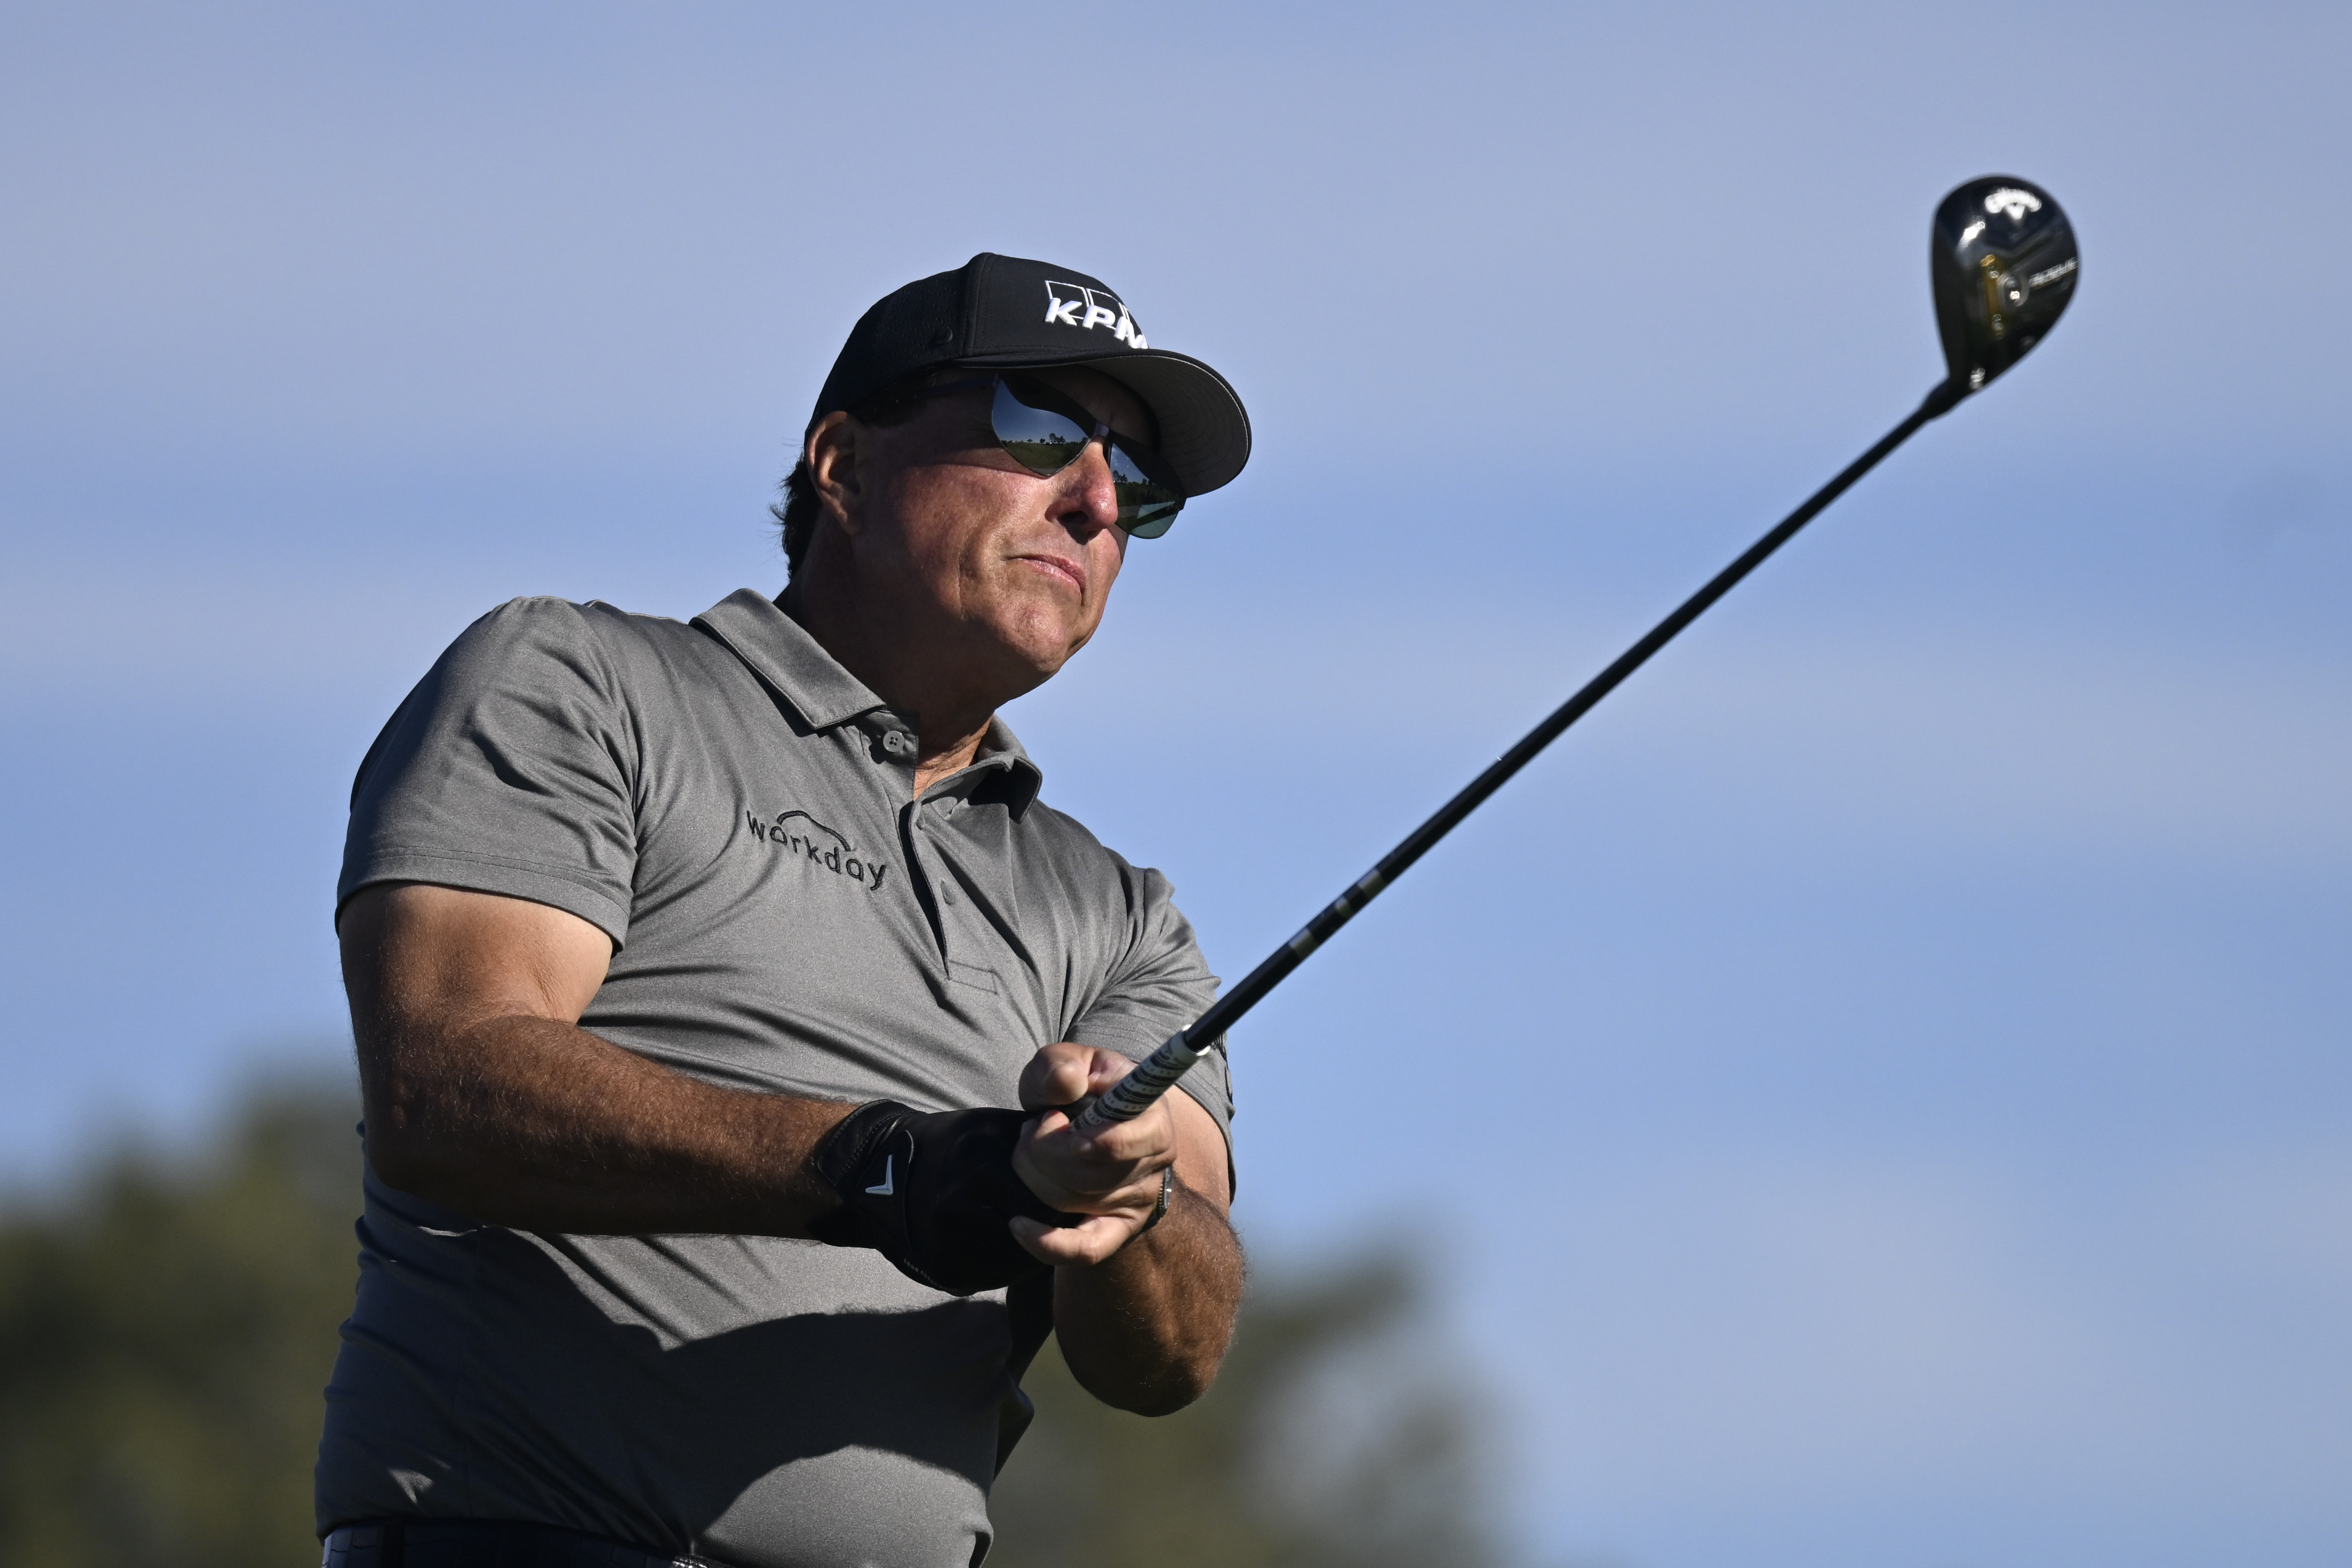 LIV Golf Invitational Series Round 1 FREE LIVE STREAM (6/9/22) Watch Phil Mickelson, Dustin Johnson at Centurion Club online Time, streaming, dates 